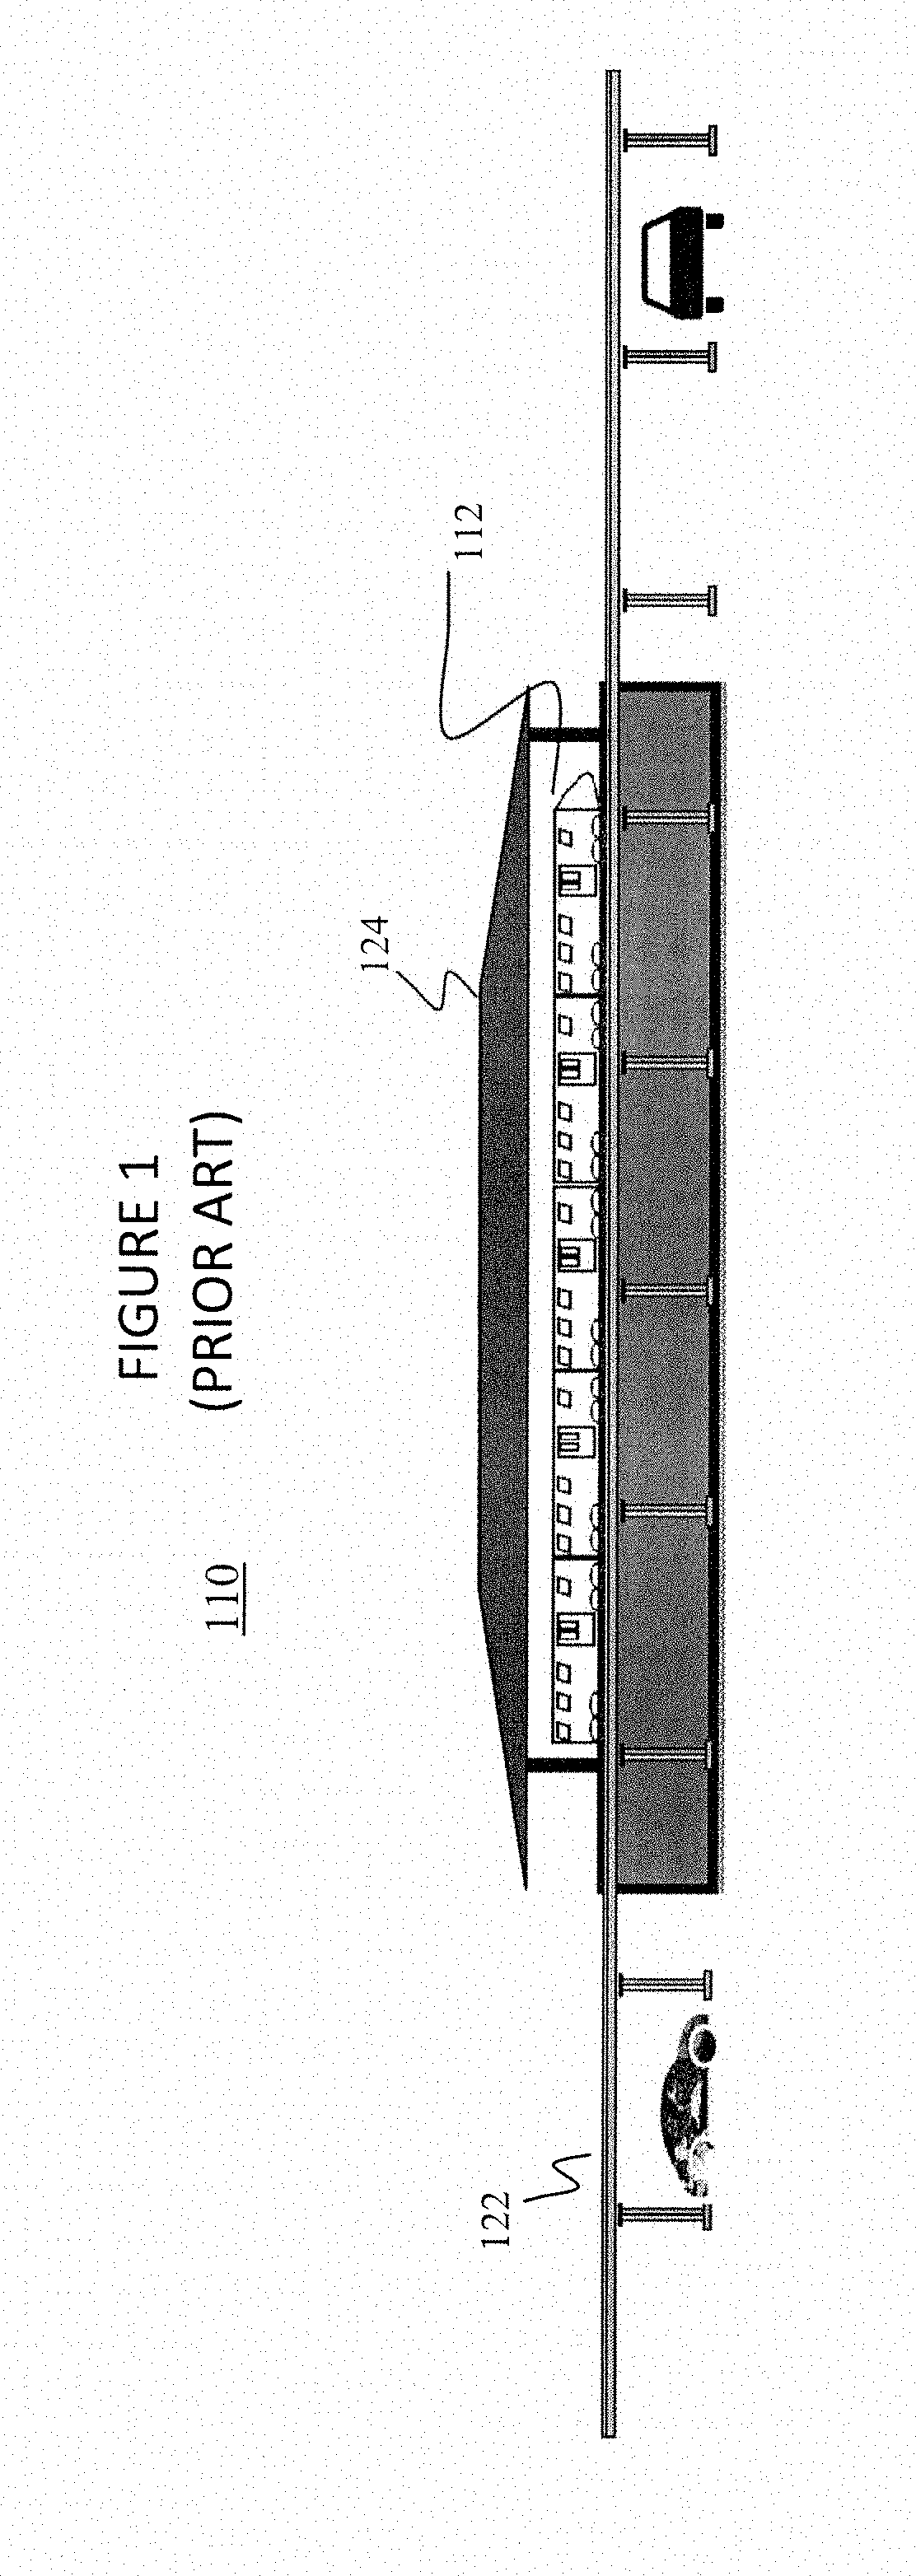 System and method of estimating values for commands to cause vehicles to follow a trajectory in a complex track network